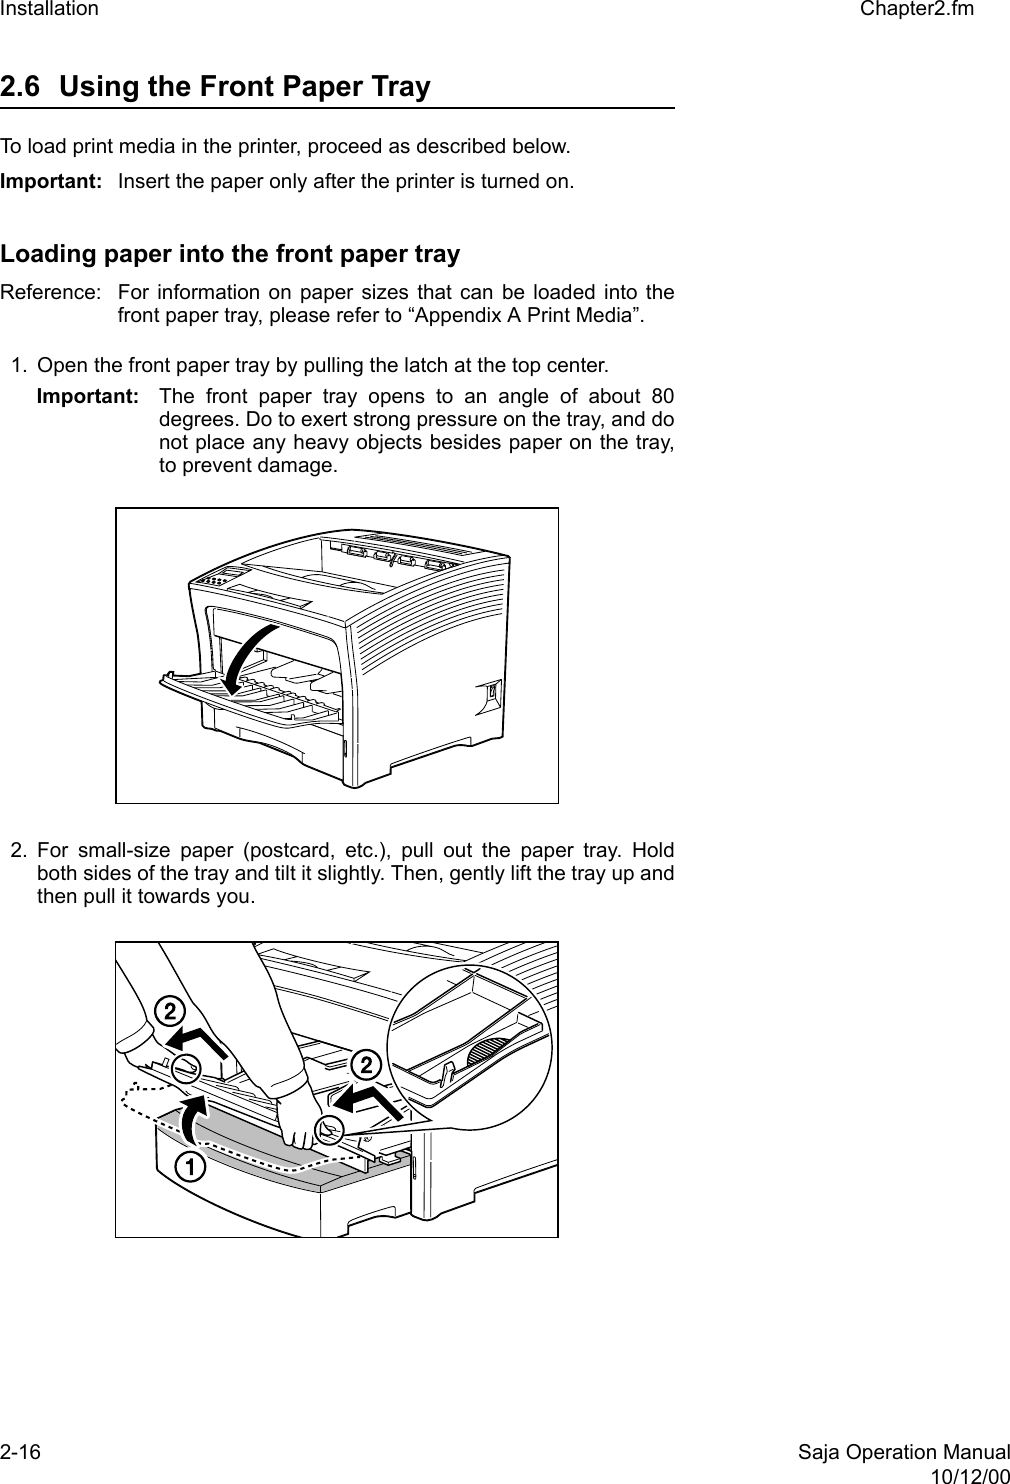 2-16 Saja Operation Manual10/12/00Installation Chapter2.fm2.6 Using the Front Paper Tray To load print media in the printer, proceed as described below. Important: Insert the paper only after the printer is turned on. Loading paper into the front paper trayReference:  For information on paper sizes that can be loaded into thefront paper tray, please refer to “Appendix A Print Media”. 1. Open the front paper tray by pulling the latch at the top center. Important: The front paper tray opens to an angle of about 80degrees. Do to exert strong pressure on the tray, and donot place any heavy objects besides paper on the tray,to prevent damage. 2. For small-size paper (postcard, etc.), pull out the paper tray. Holdboth sides of the tray and tilt it slightly. Then, gently lift the tray up andthen pull it towards you.